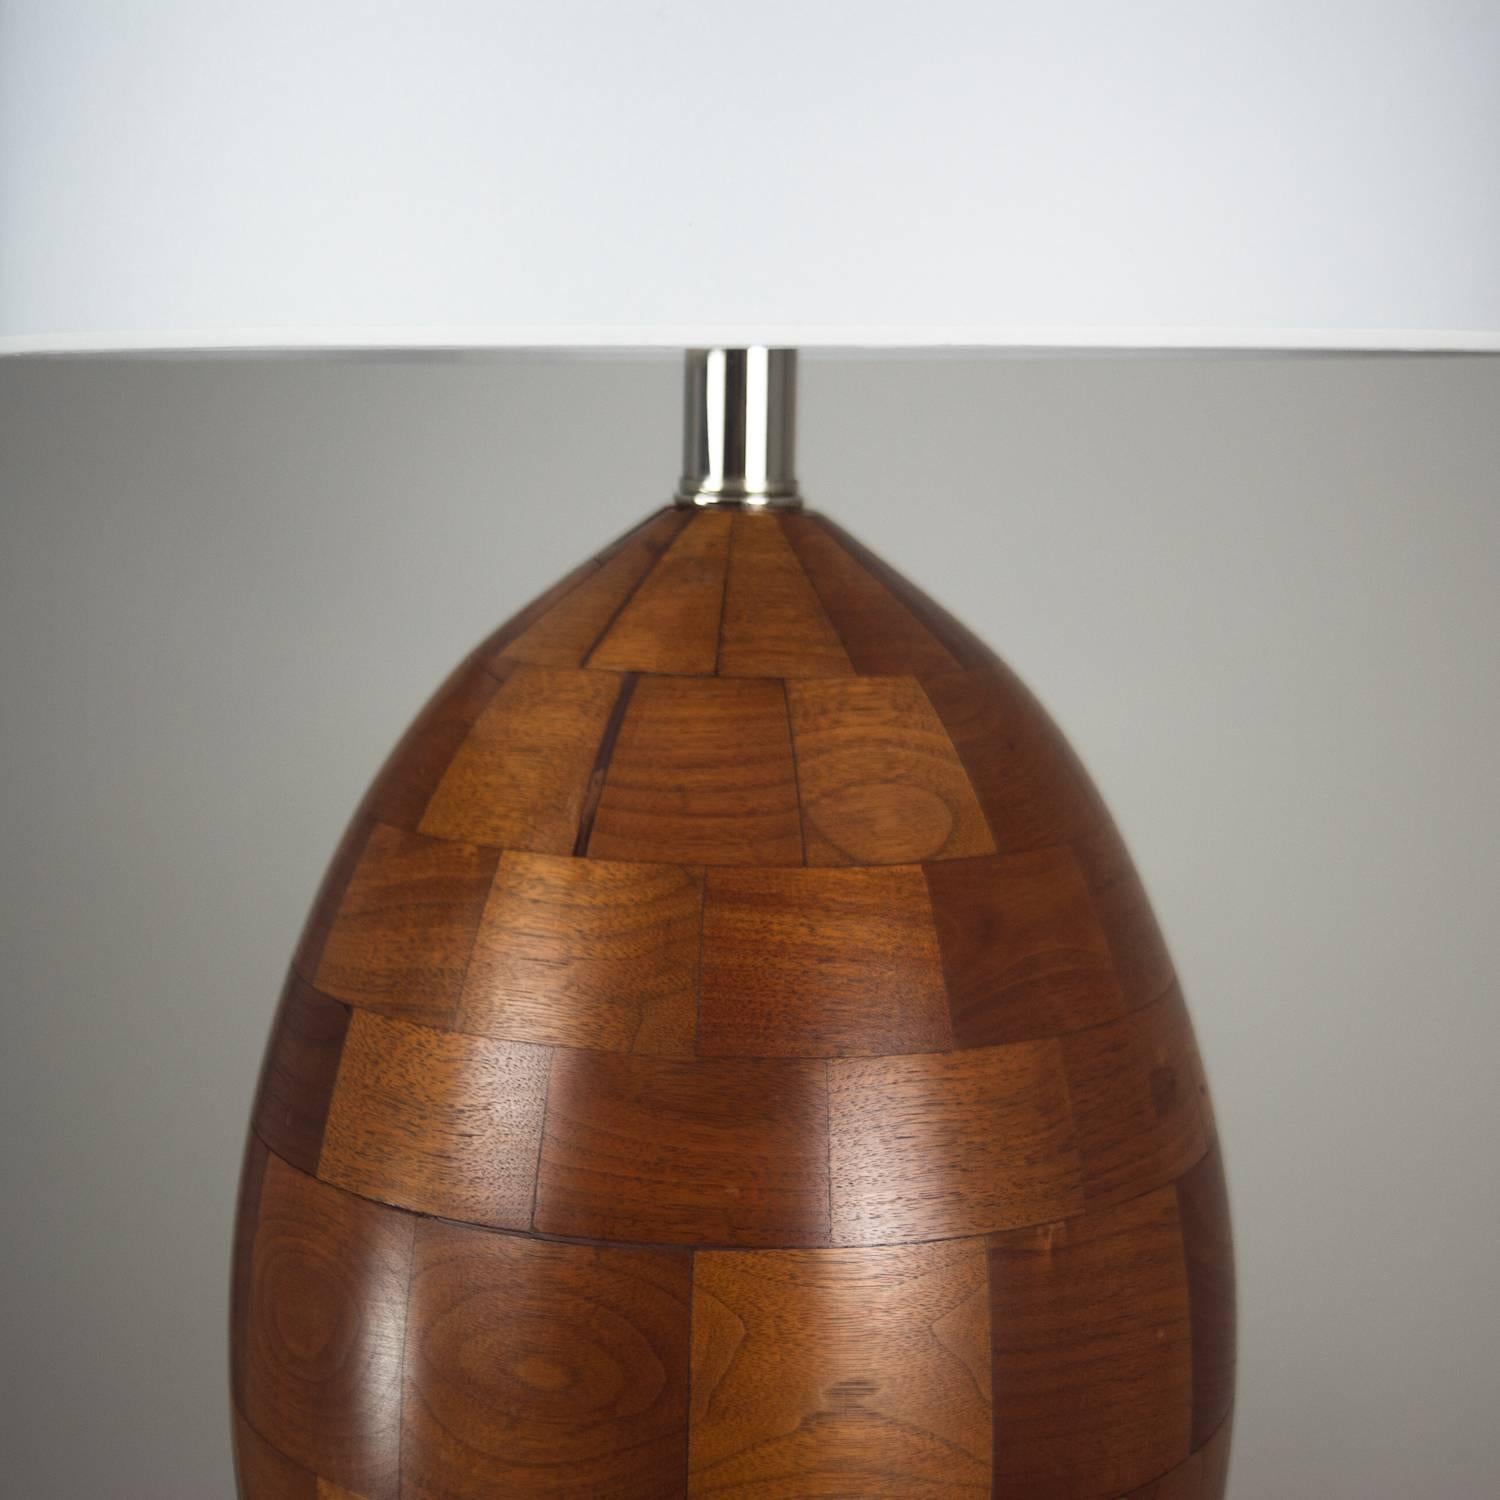 Egg shaped walnut lamp made of staved walnut blocks with clear satin finish. Professionally rewired with black silk cord and new lamp shade. 

Shade measures 14